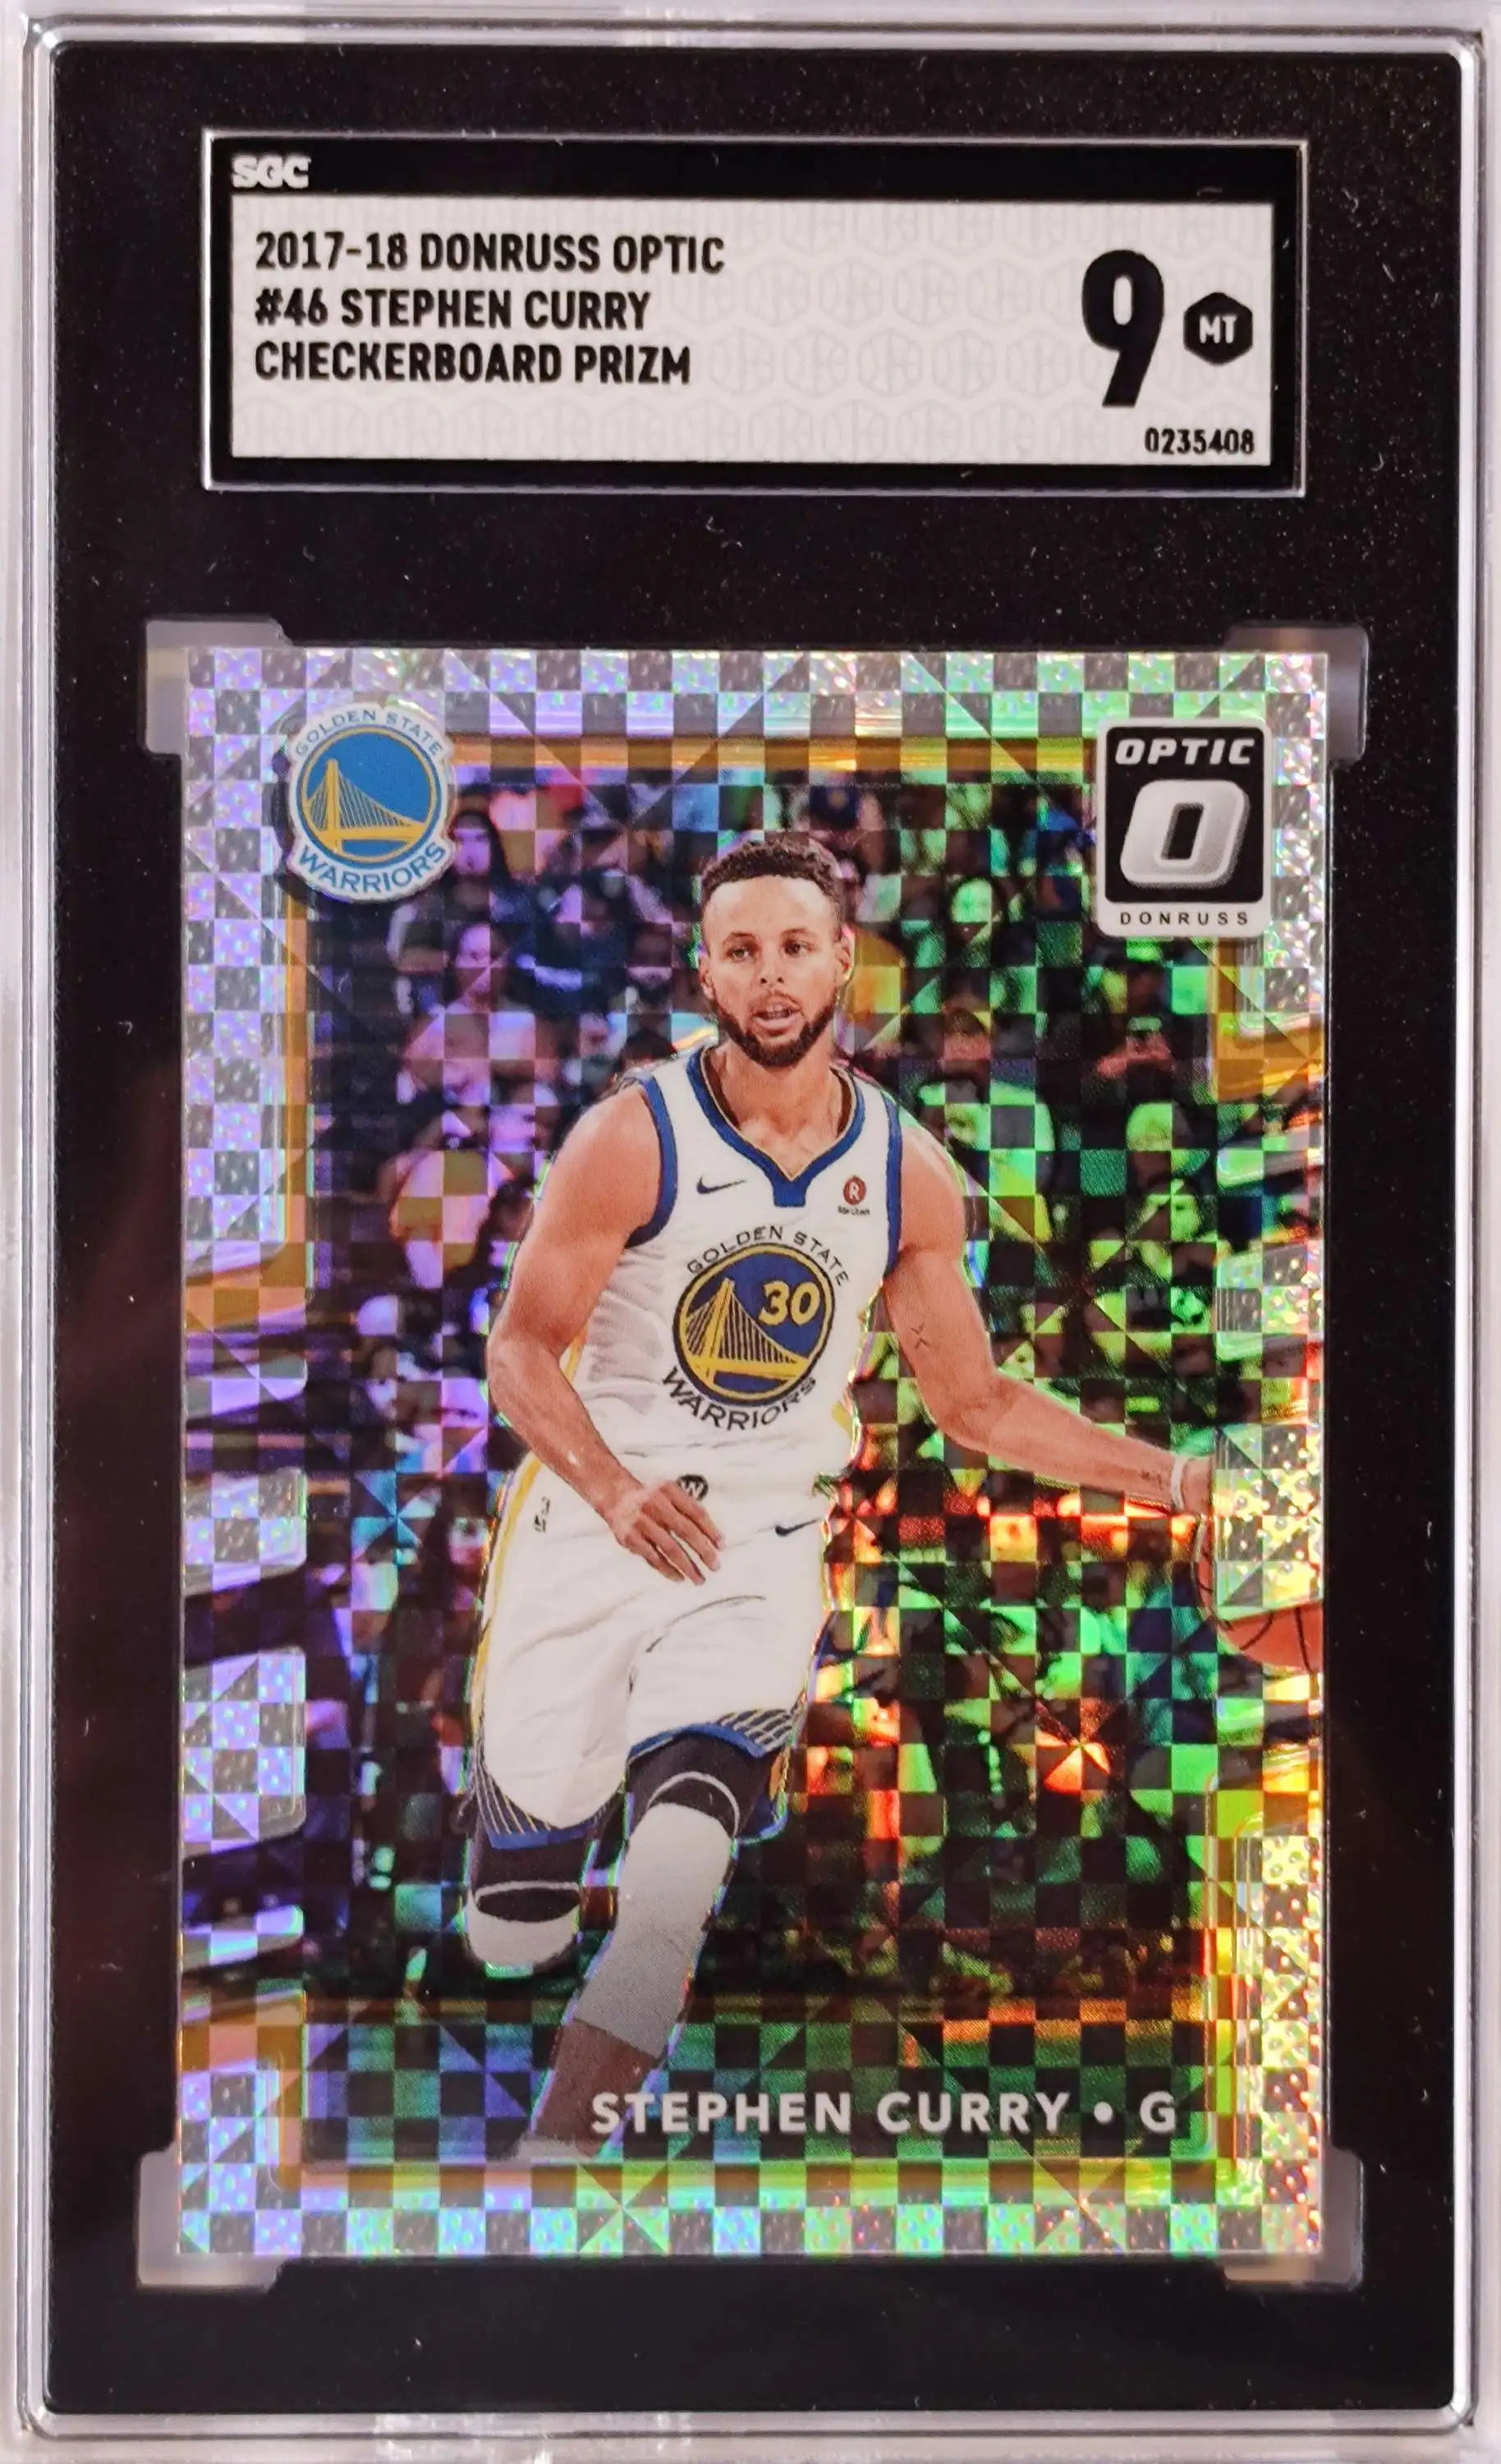  Stephen Curry Autographed 2017-18 Panini Donruss Optic  Basketball Card - BAS : Collectibles & Fine Art